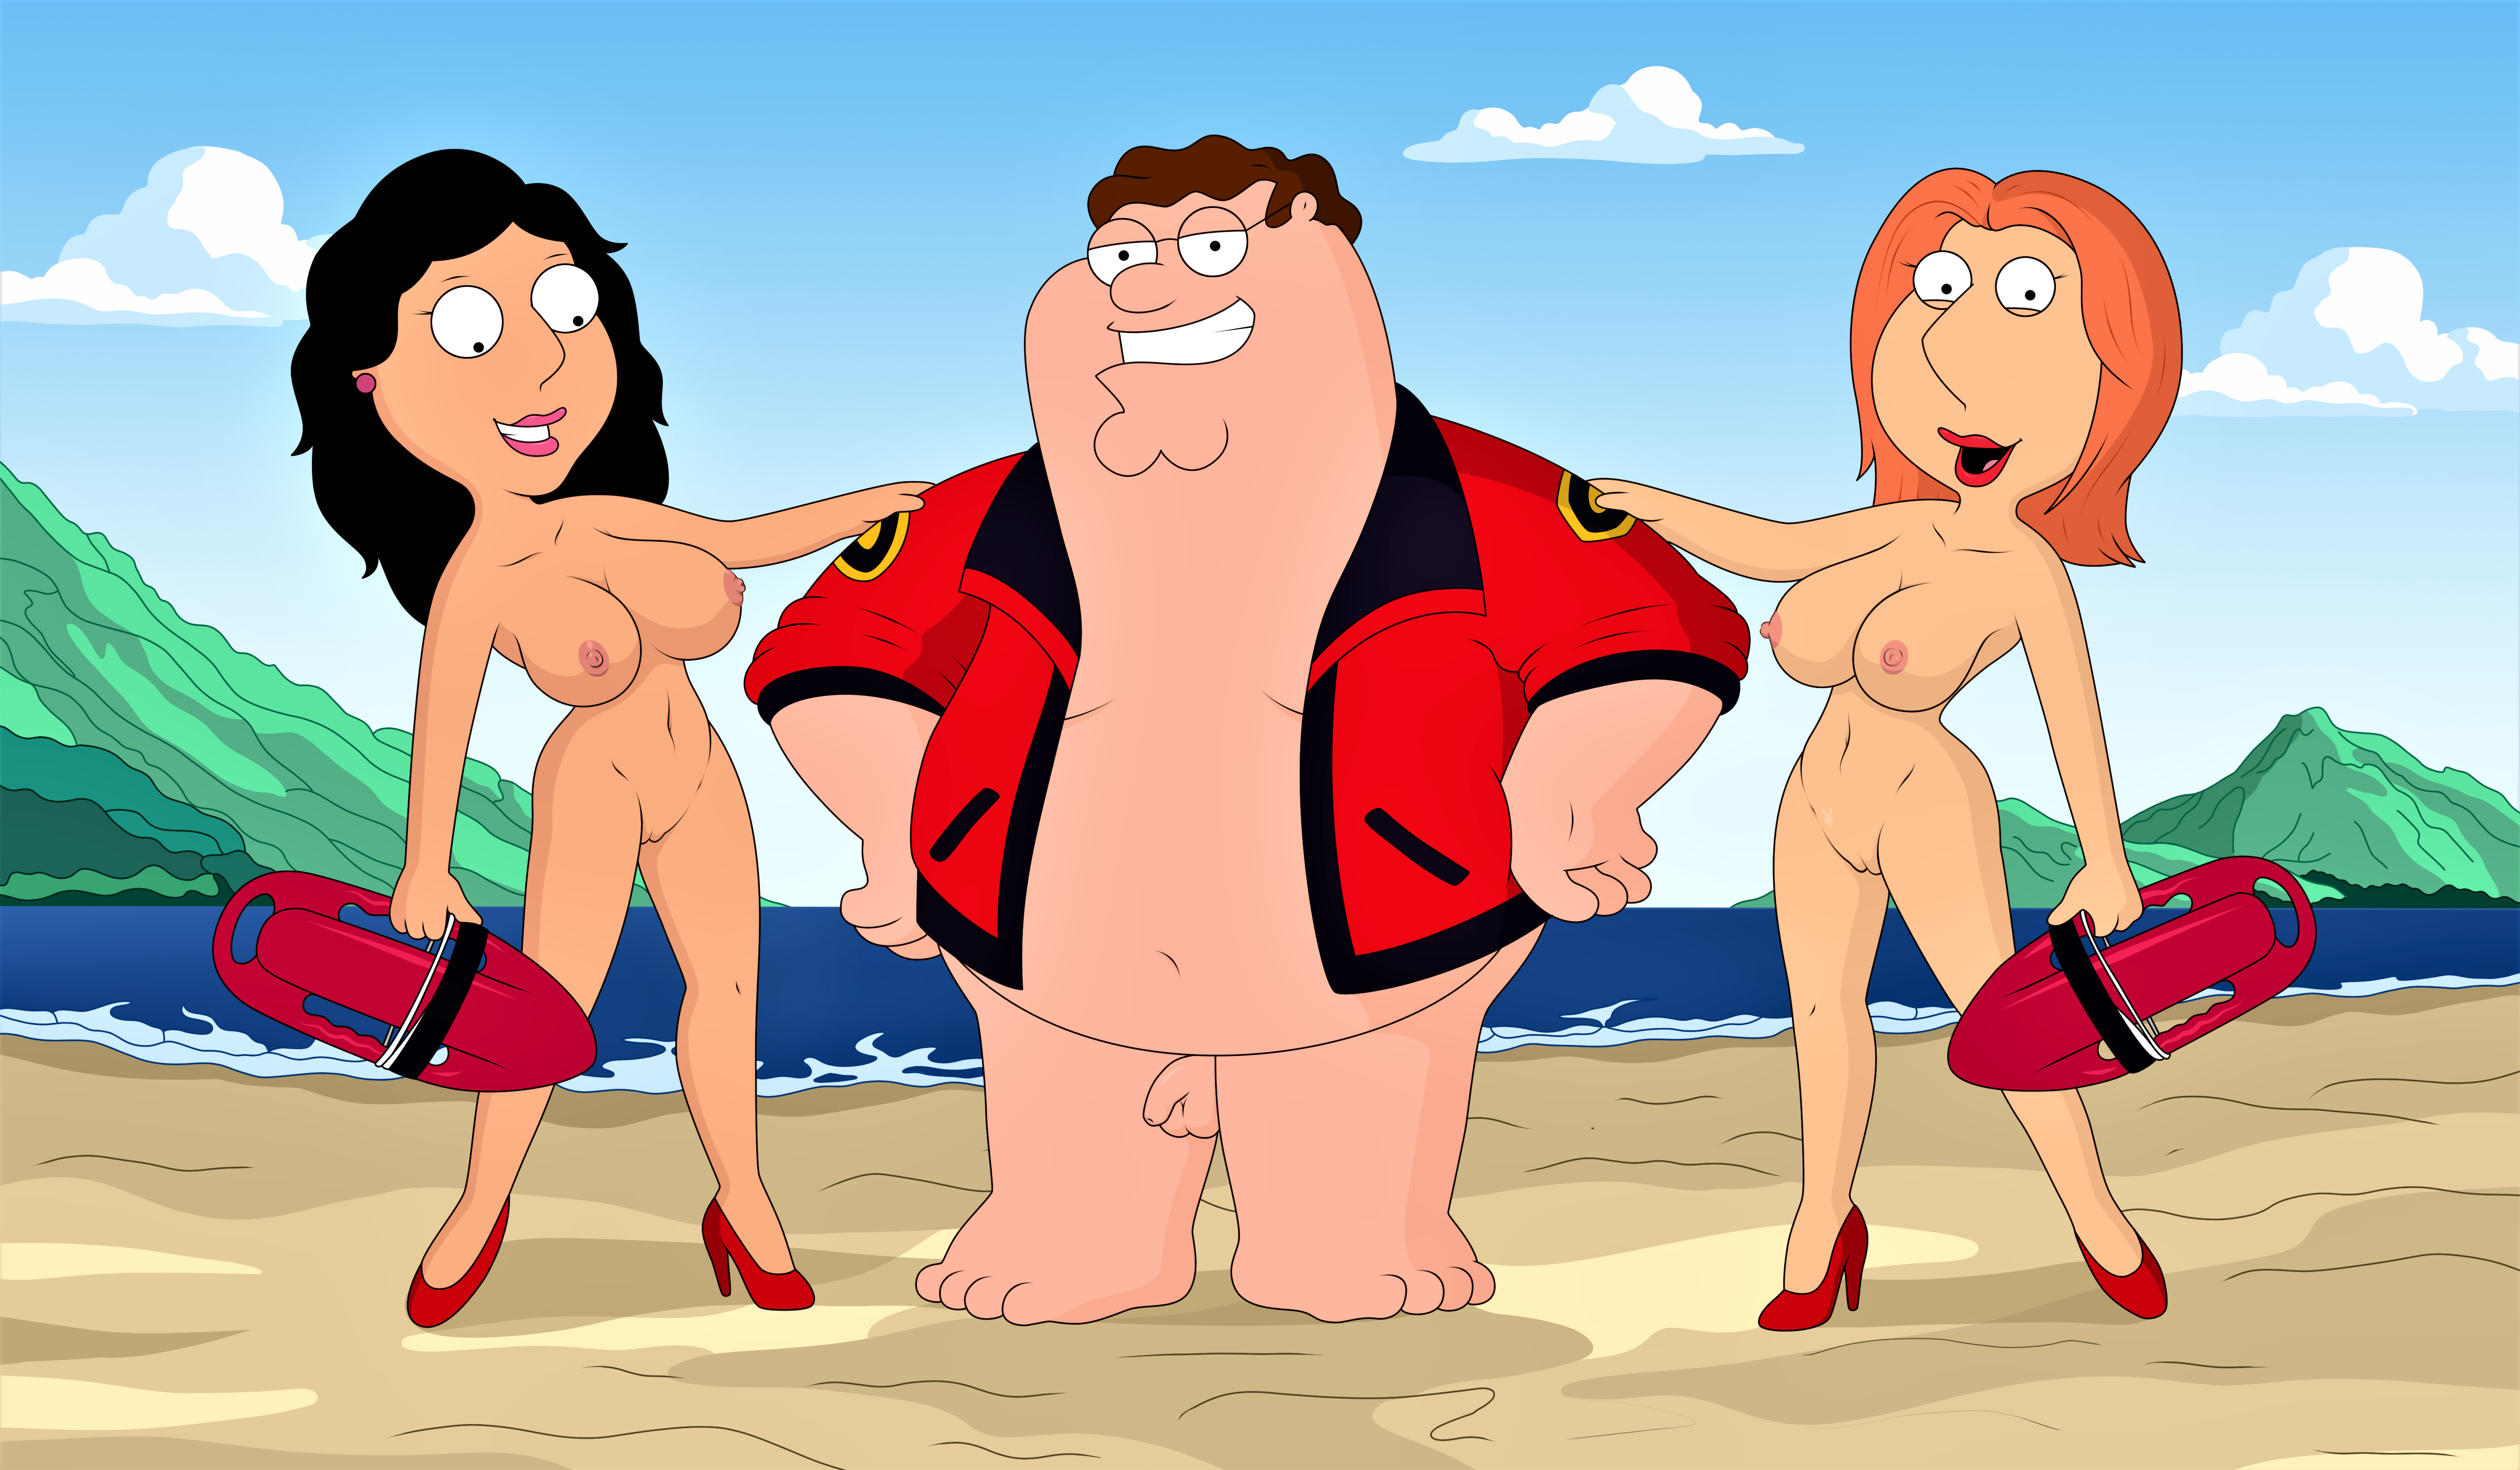 family guy girl characters nude hd pic